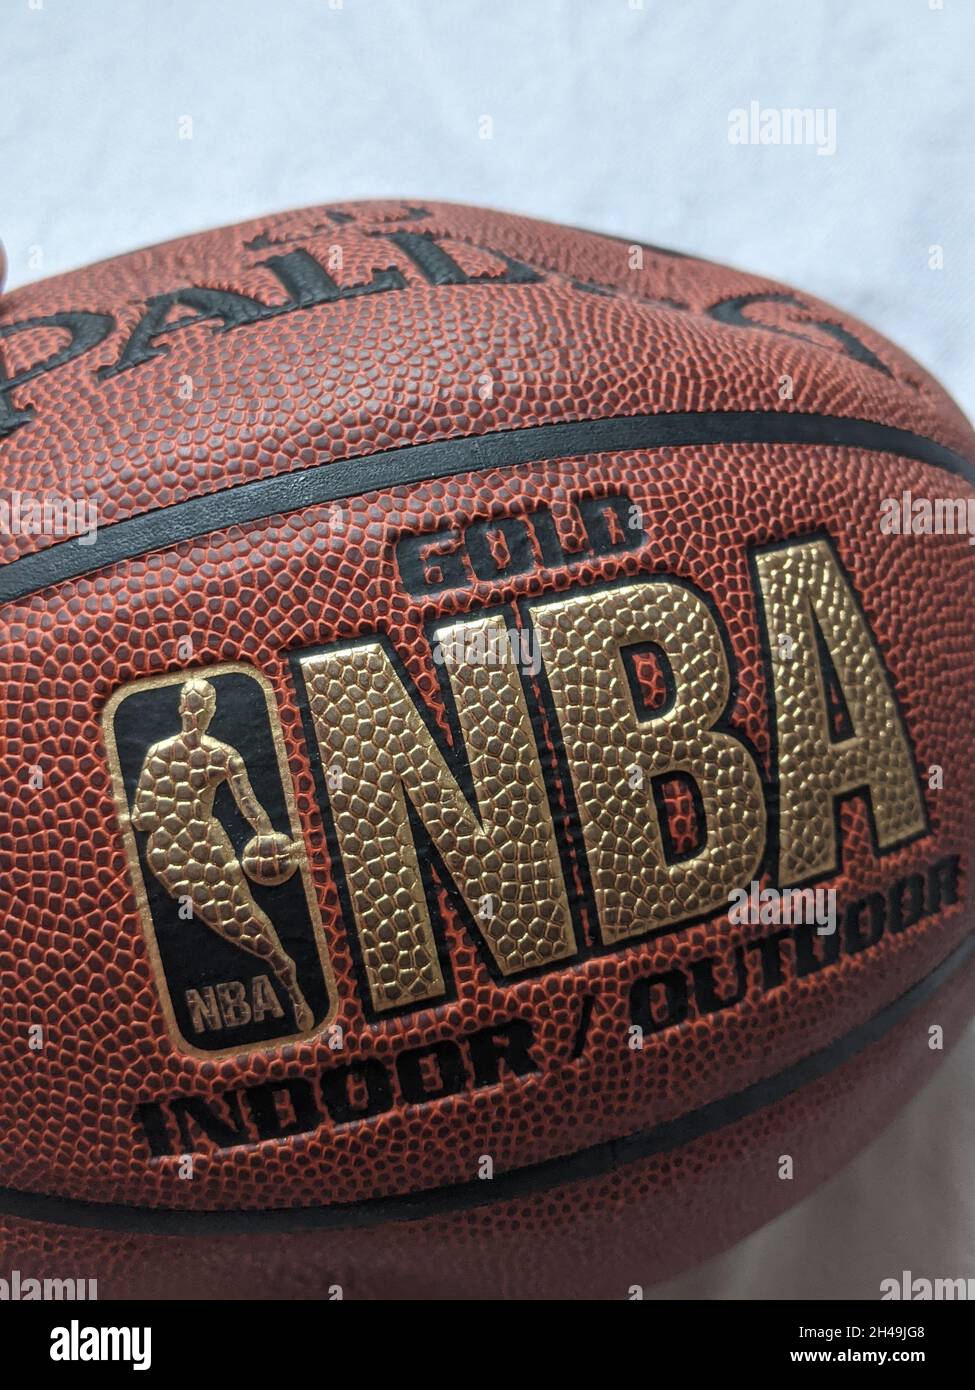 Spalding gold series basketball endorsed by NBA Stock Photo - Alamy